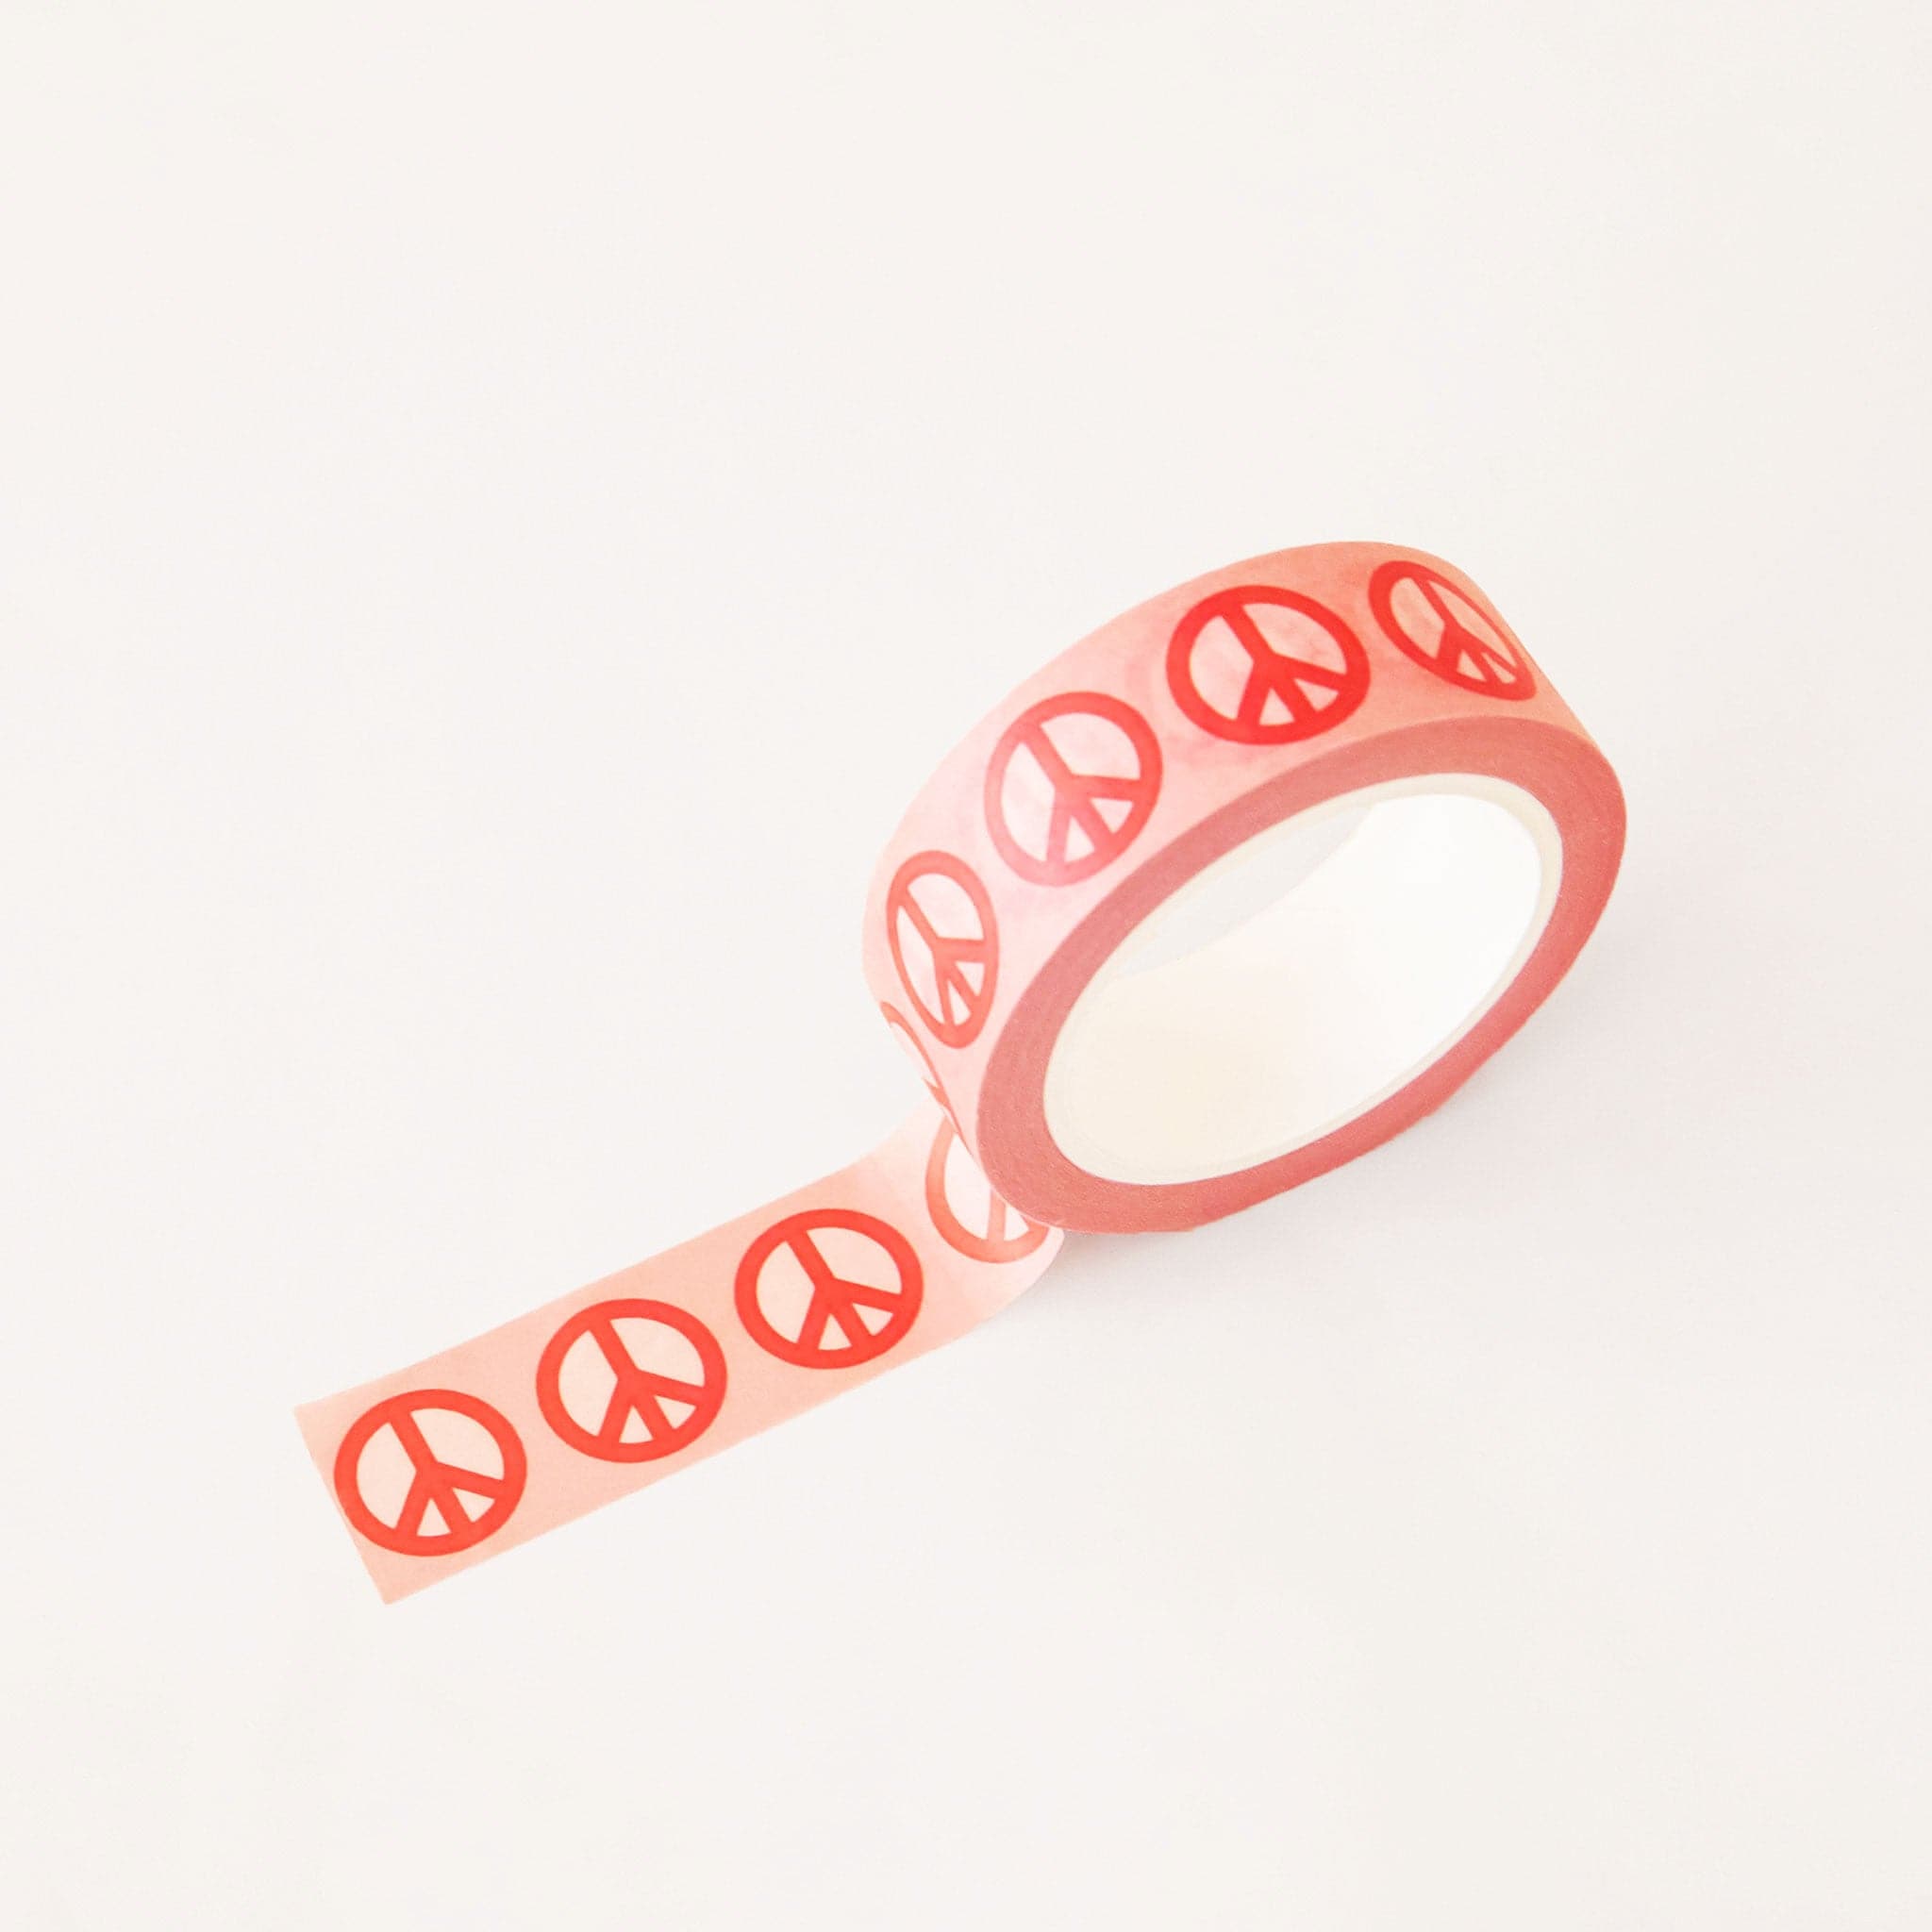 Roll of pink washi tape covered in red classic peace sign symbols. The roll is position upright, partially unrolled.